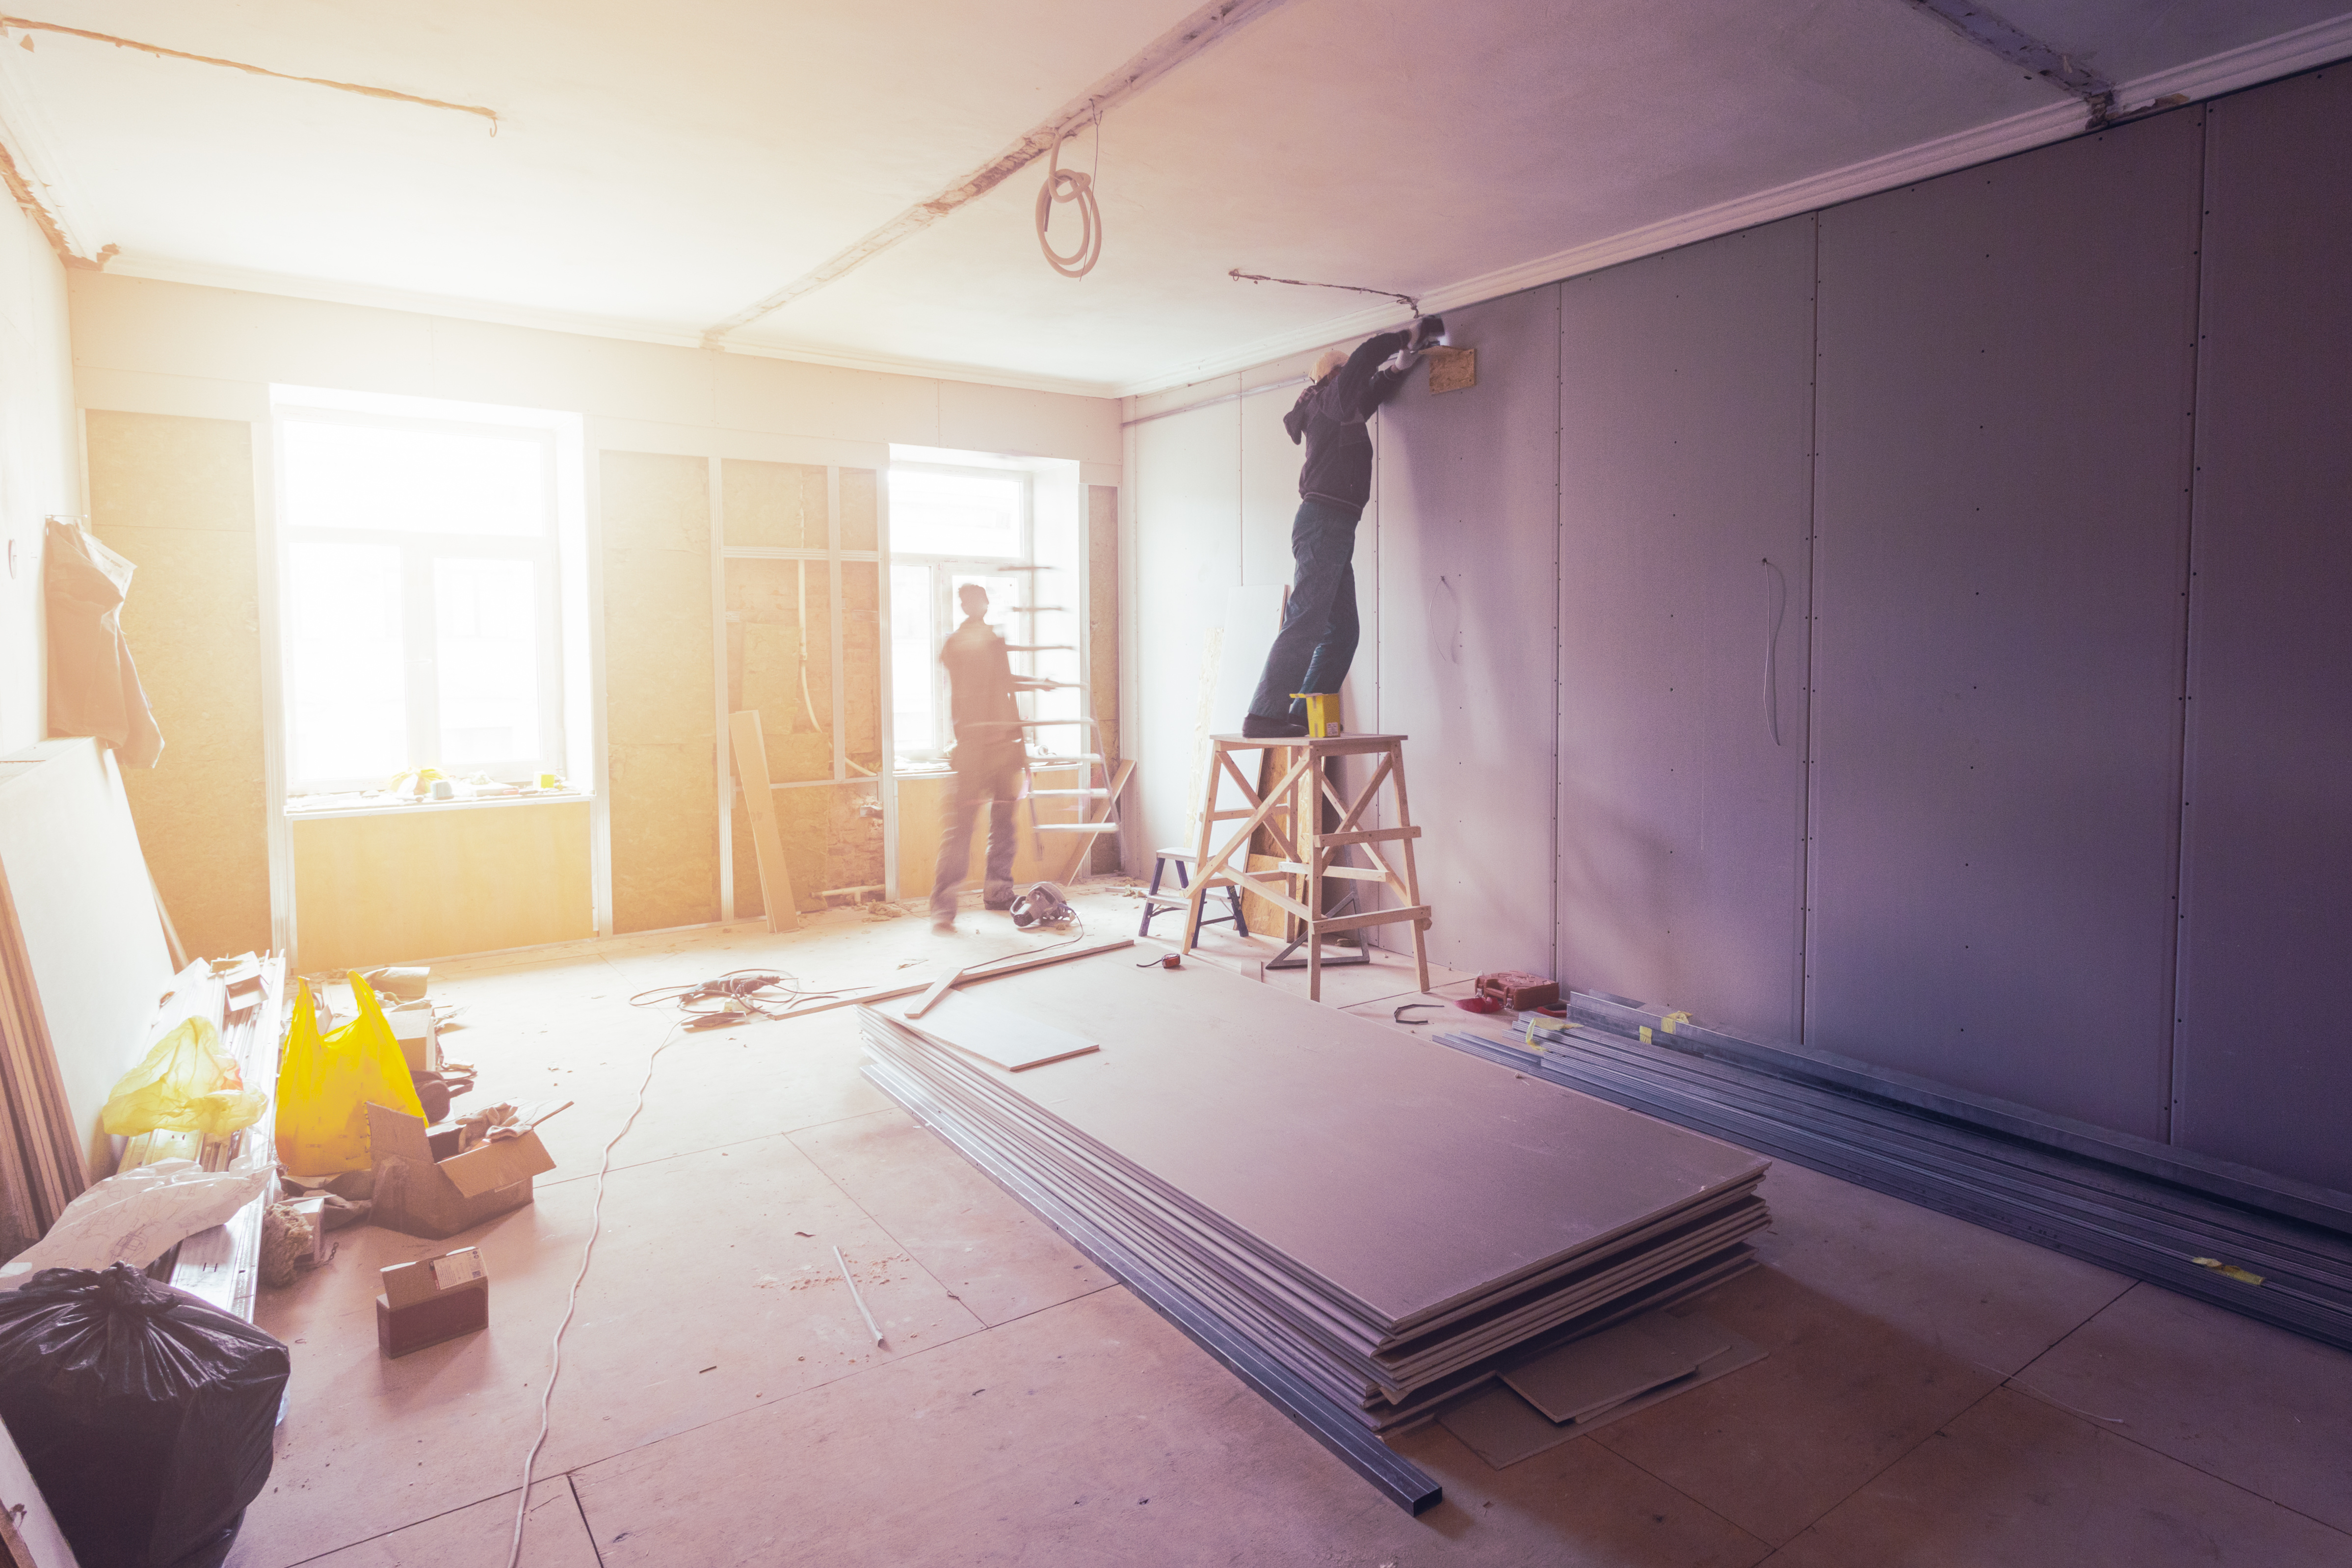 Workers are installing plasterboard (drywall) for gypsum walls in apartment is under construction, remodeling, renovation, extension, restoration and reconstruction